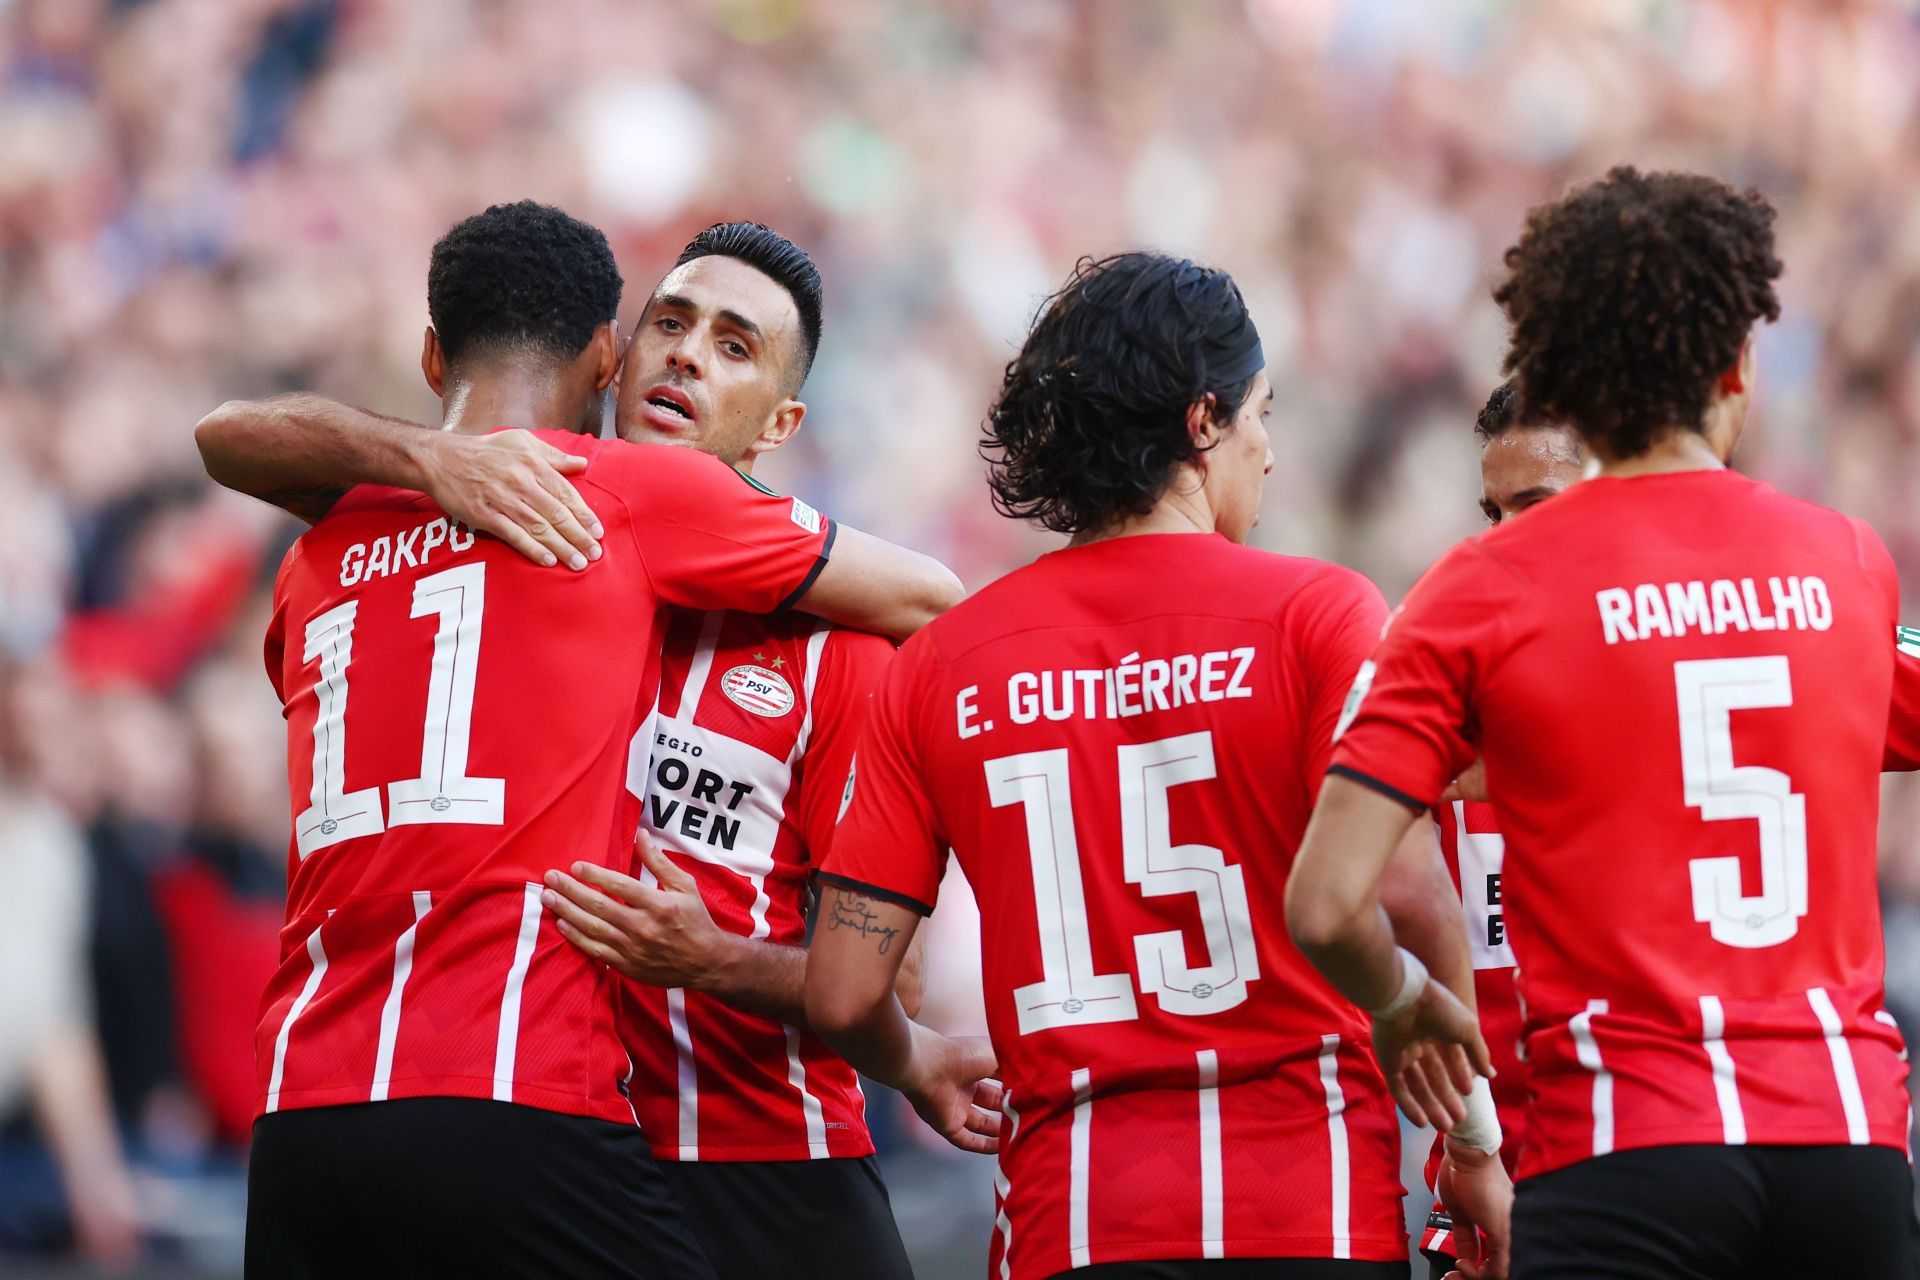 PSV Eindhoven will face Eindhoven on Tuesday - Club Friendlies 2022